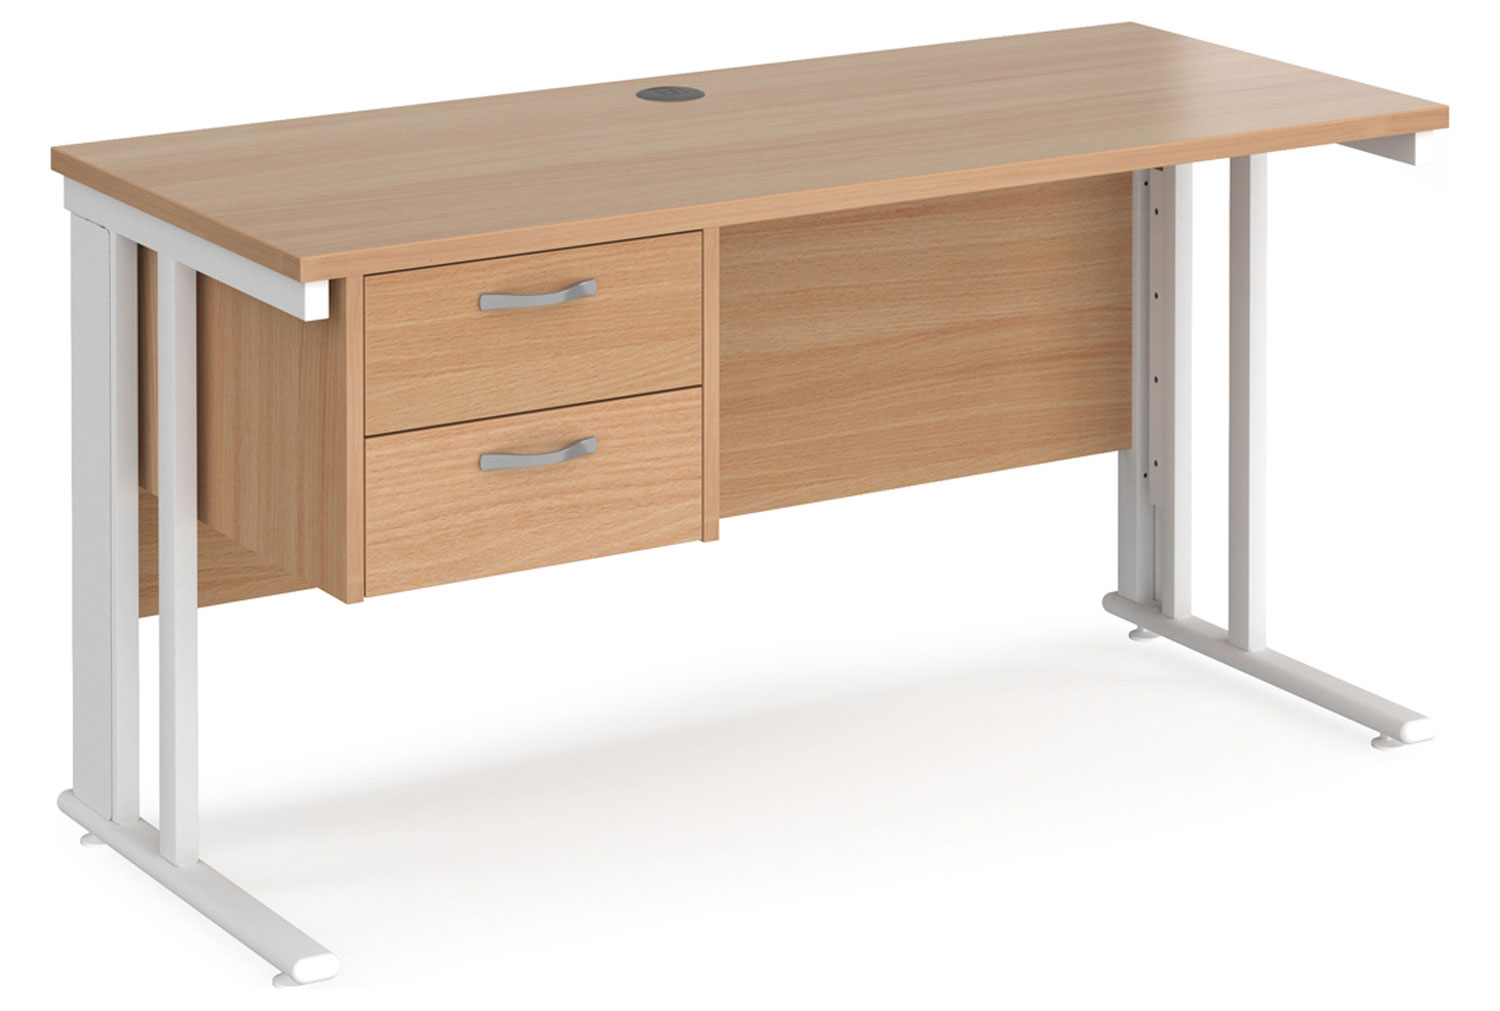 Value Line Deluxe Cable Managed Narrow Rectangular Office Desk 2 Drawers (White Legs), 140wx60dx73h (cm), Beech